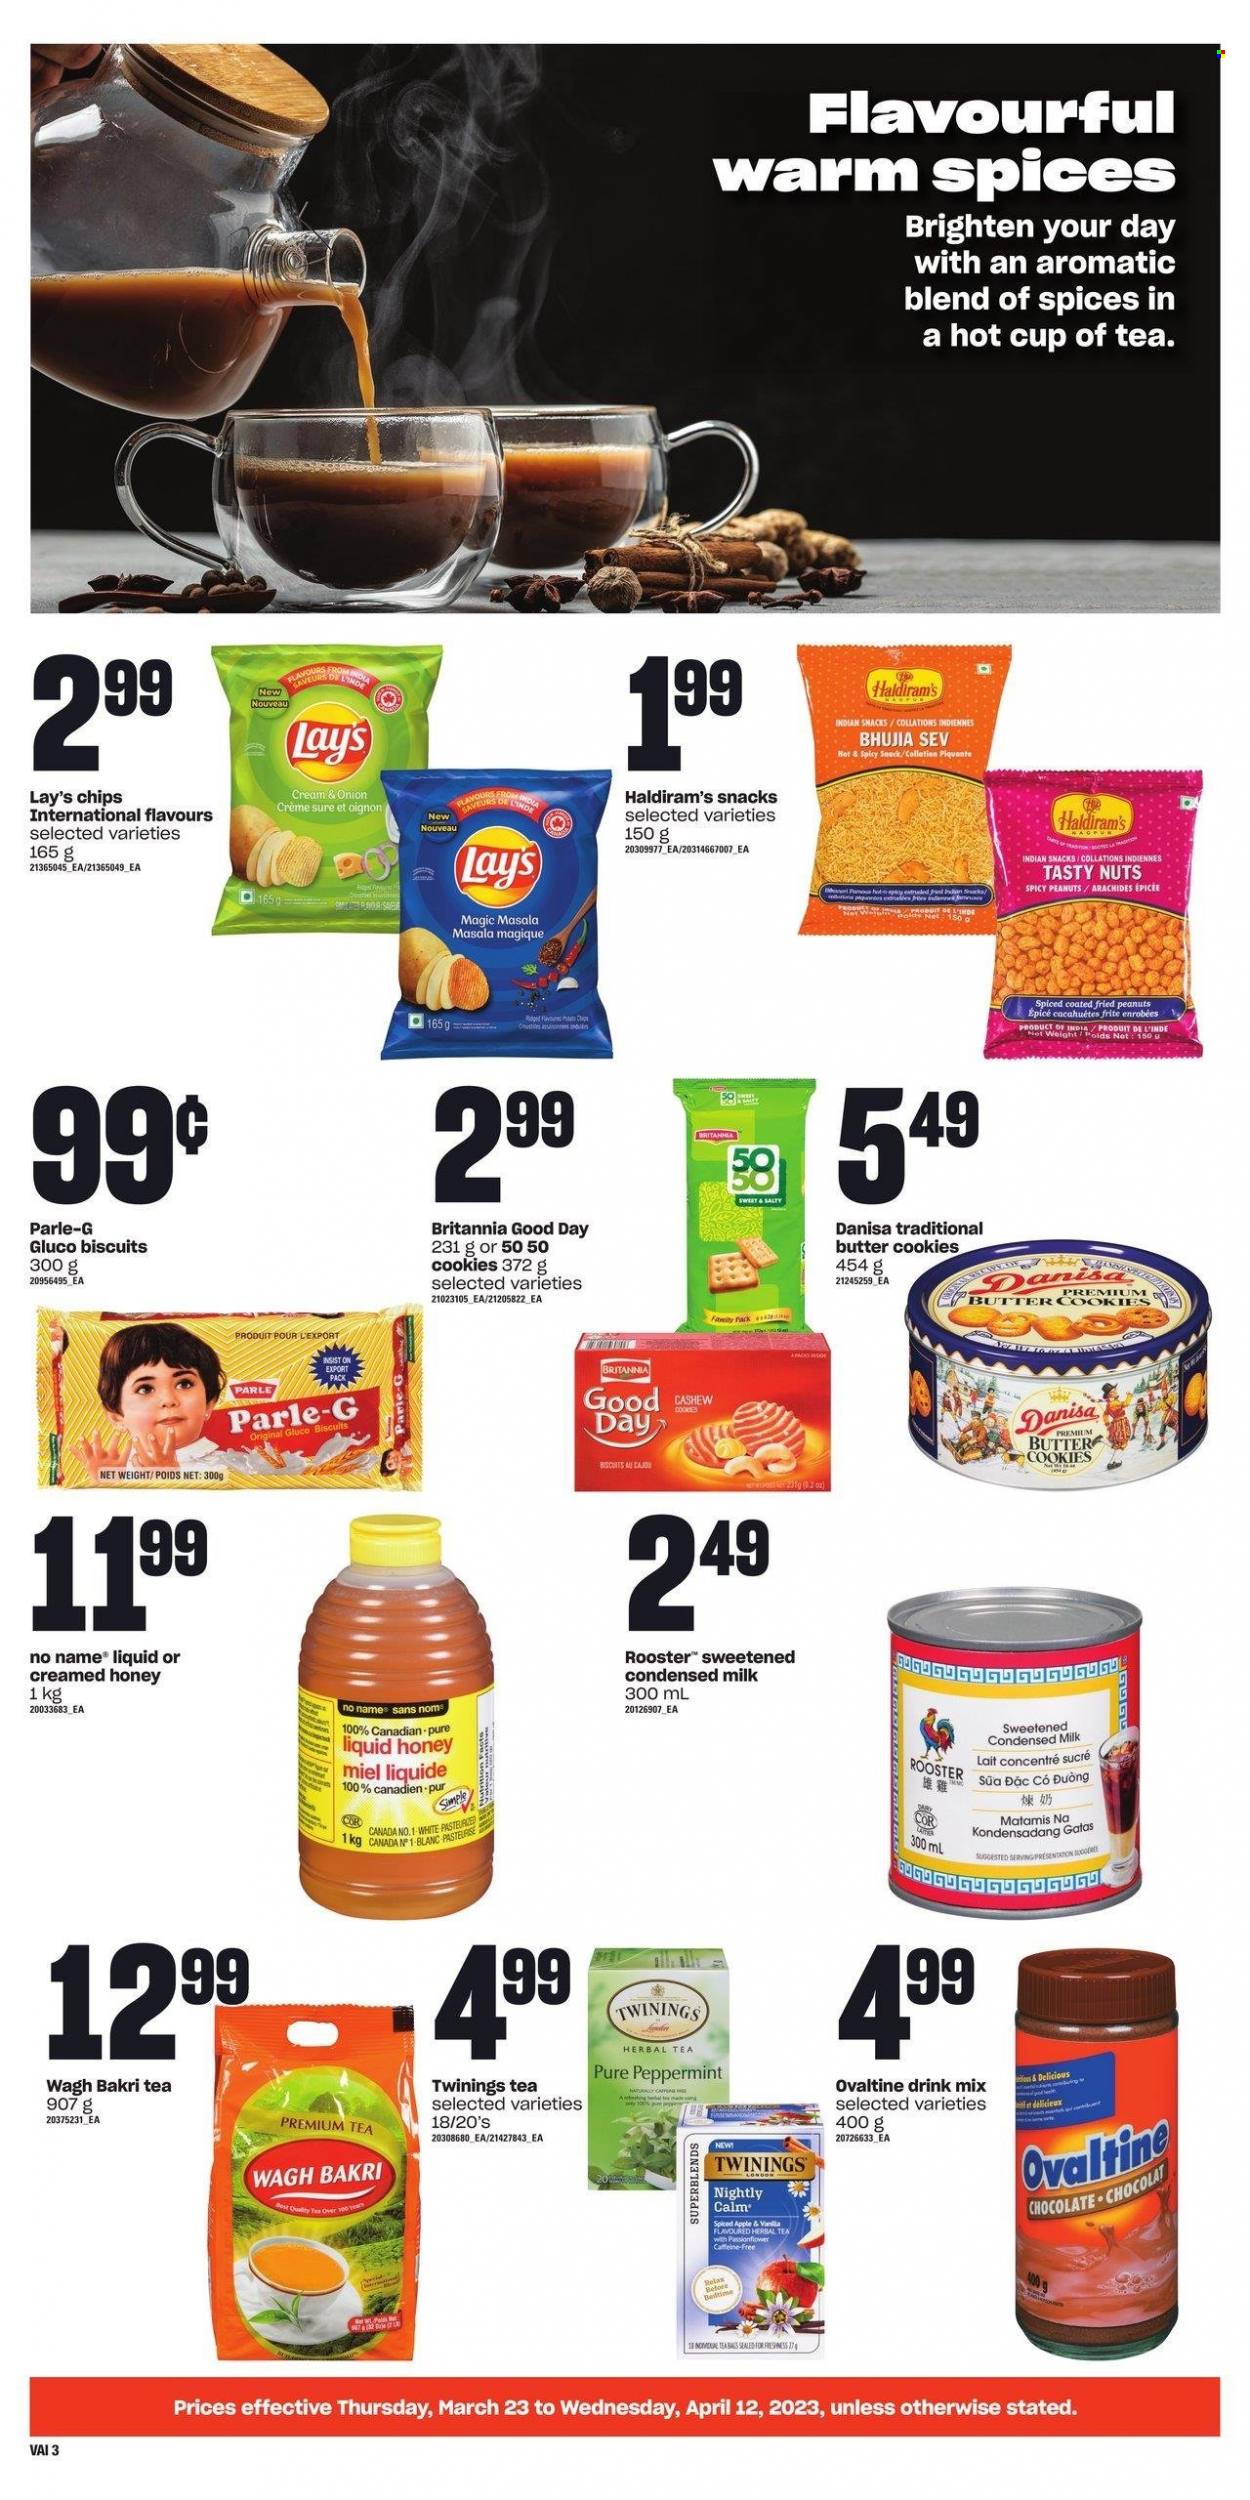 thumbnail - Circulaire Atlantic Superstore - 23 Mars 2023 - 12 Avril 2023 - Produits soldés - chocolat, biscuits, cacahuètes, cookies, chips, Lay’s, miel. Page 3.